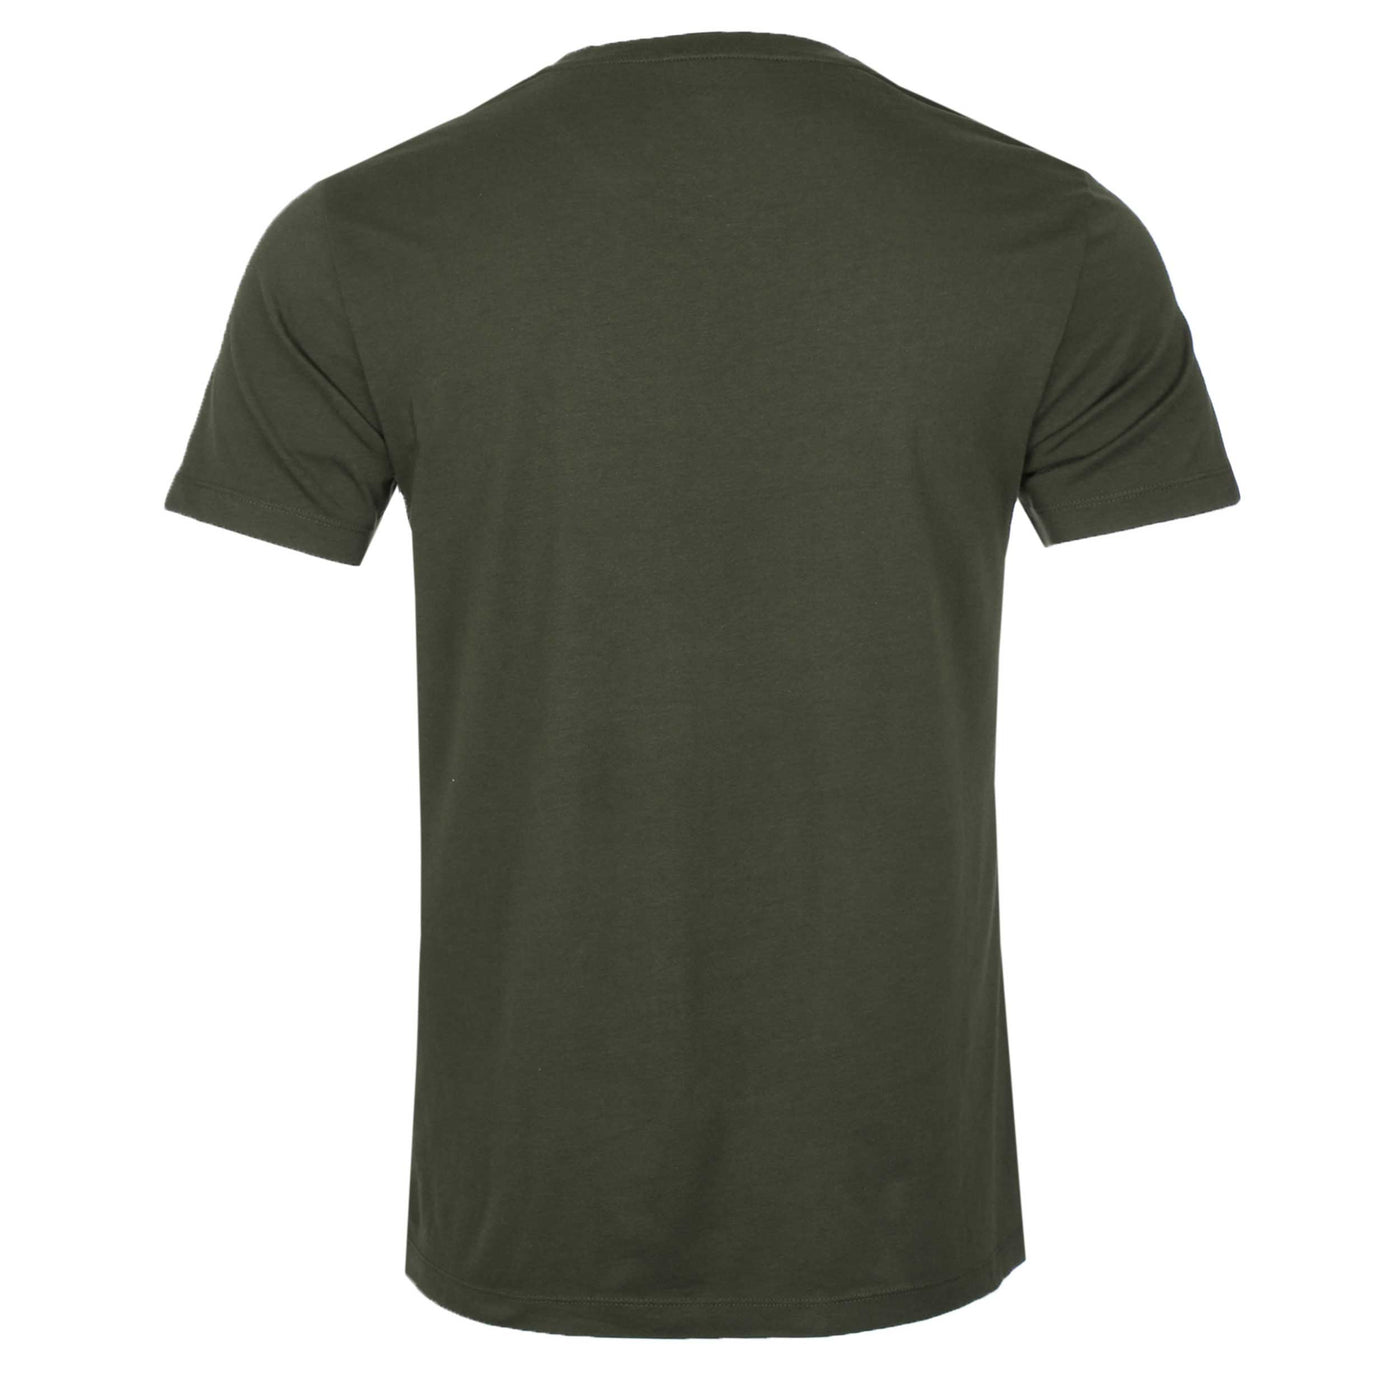 Paige Cash T Shirt in Mountain Pine Green Back